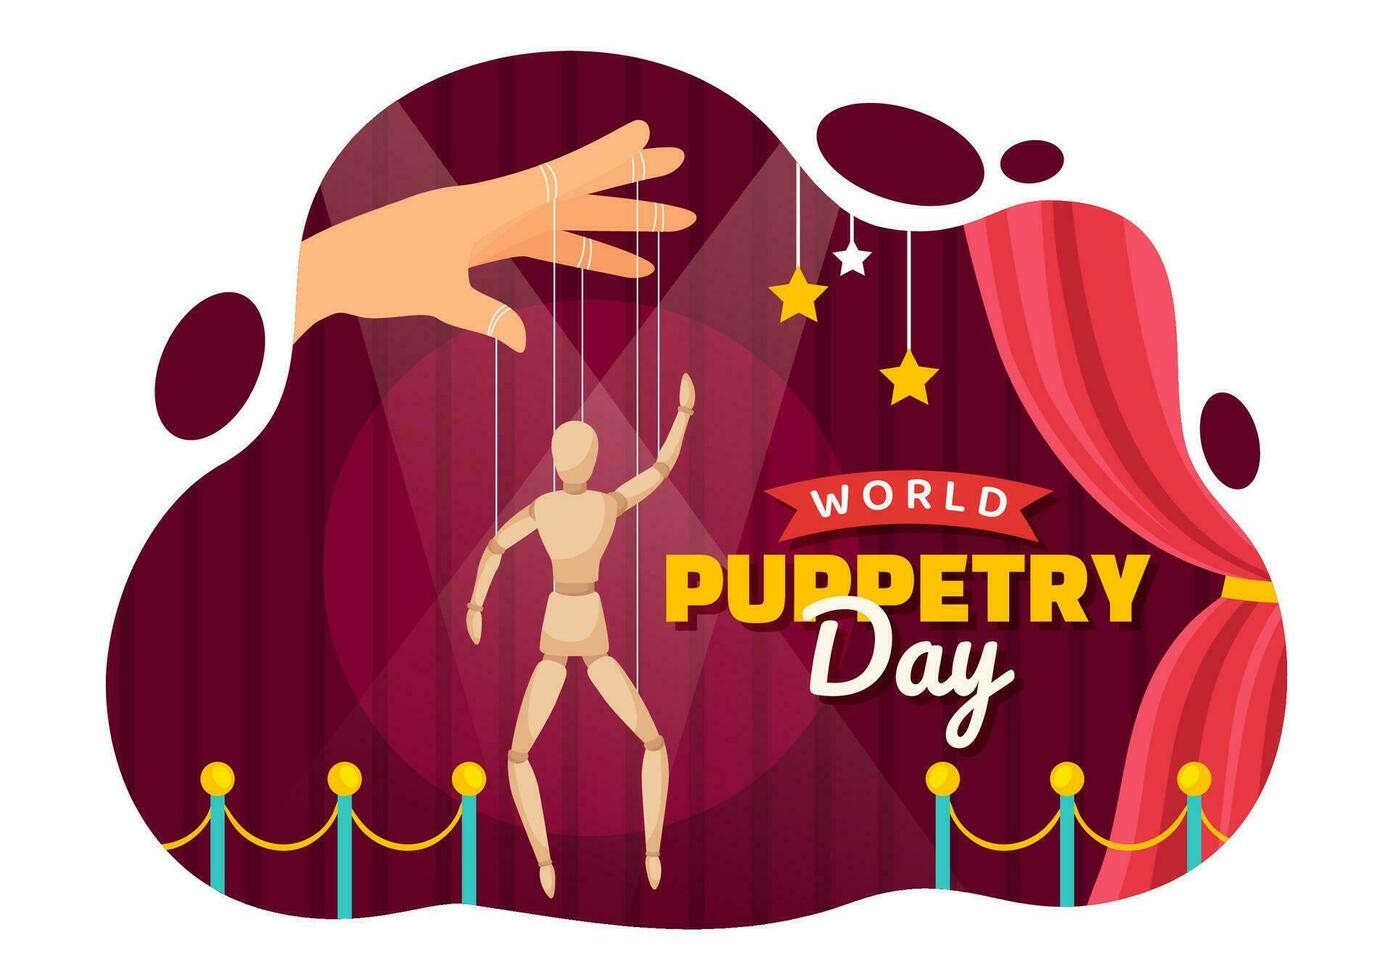 World Puppetry Day Vector Illustration on March 21 for Puppet Festivals which is moved by the Fingers Hands in Flat Cartoon Background Design